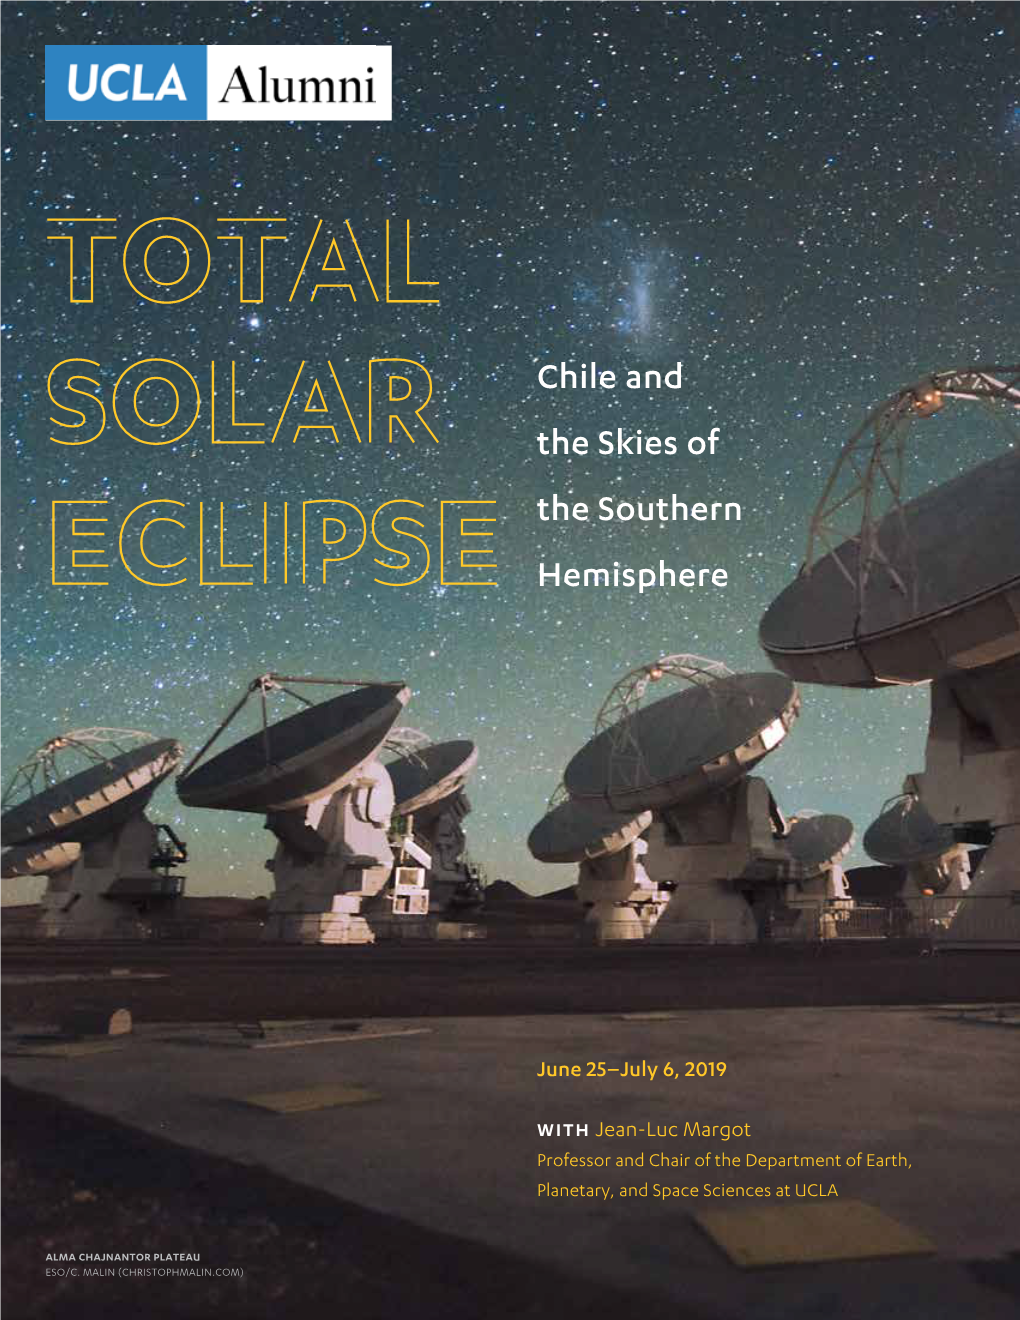 Chile and the Skies of the Southern Hemisphere